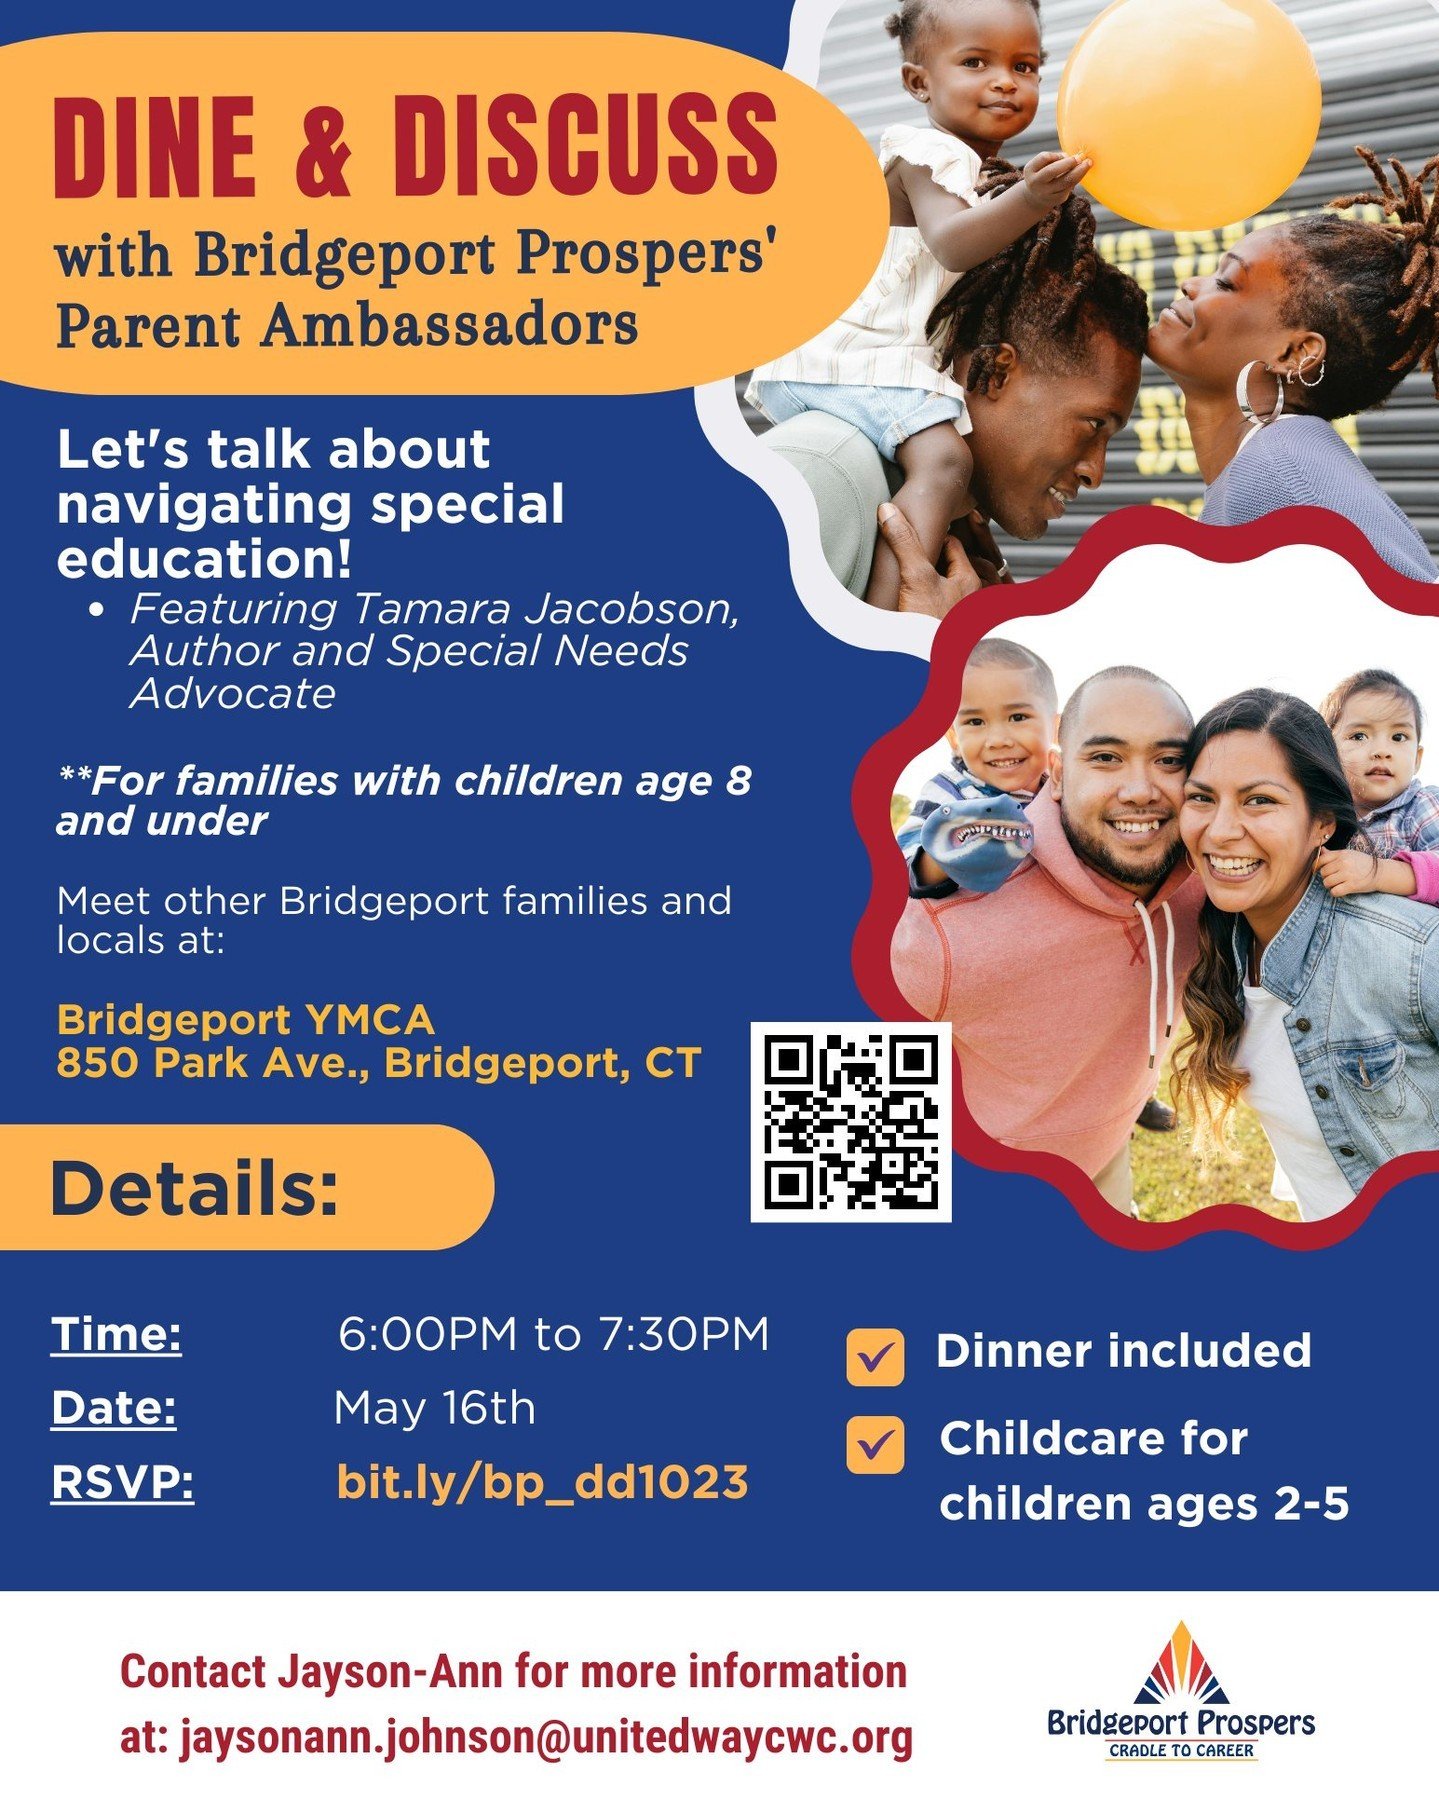 Join us for an important talk on 5/16 at 6pm about navigating special education, featuring Tamara Jacobson an Author and Special Needs Advocate. This event is for Bridgeport families with children ages 8 and under. RSVP using the QR code or link prov